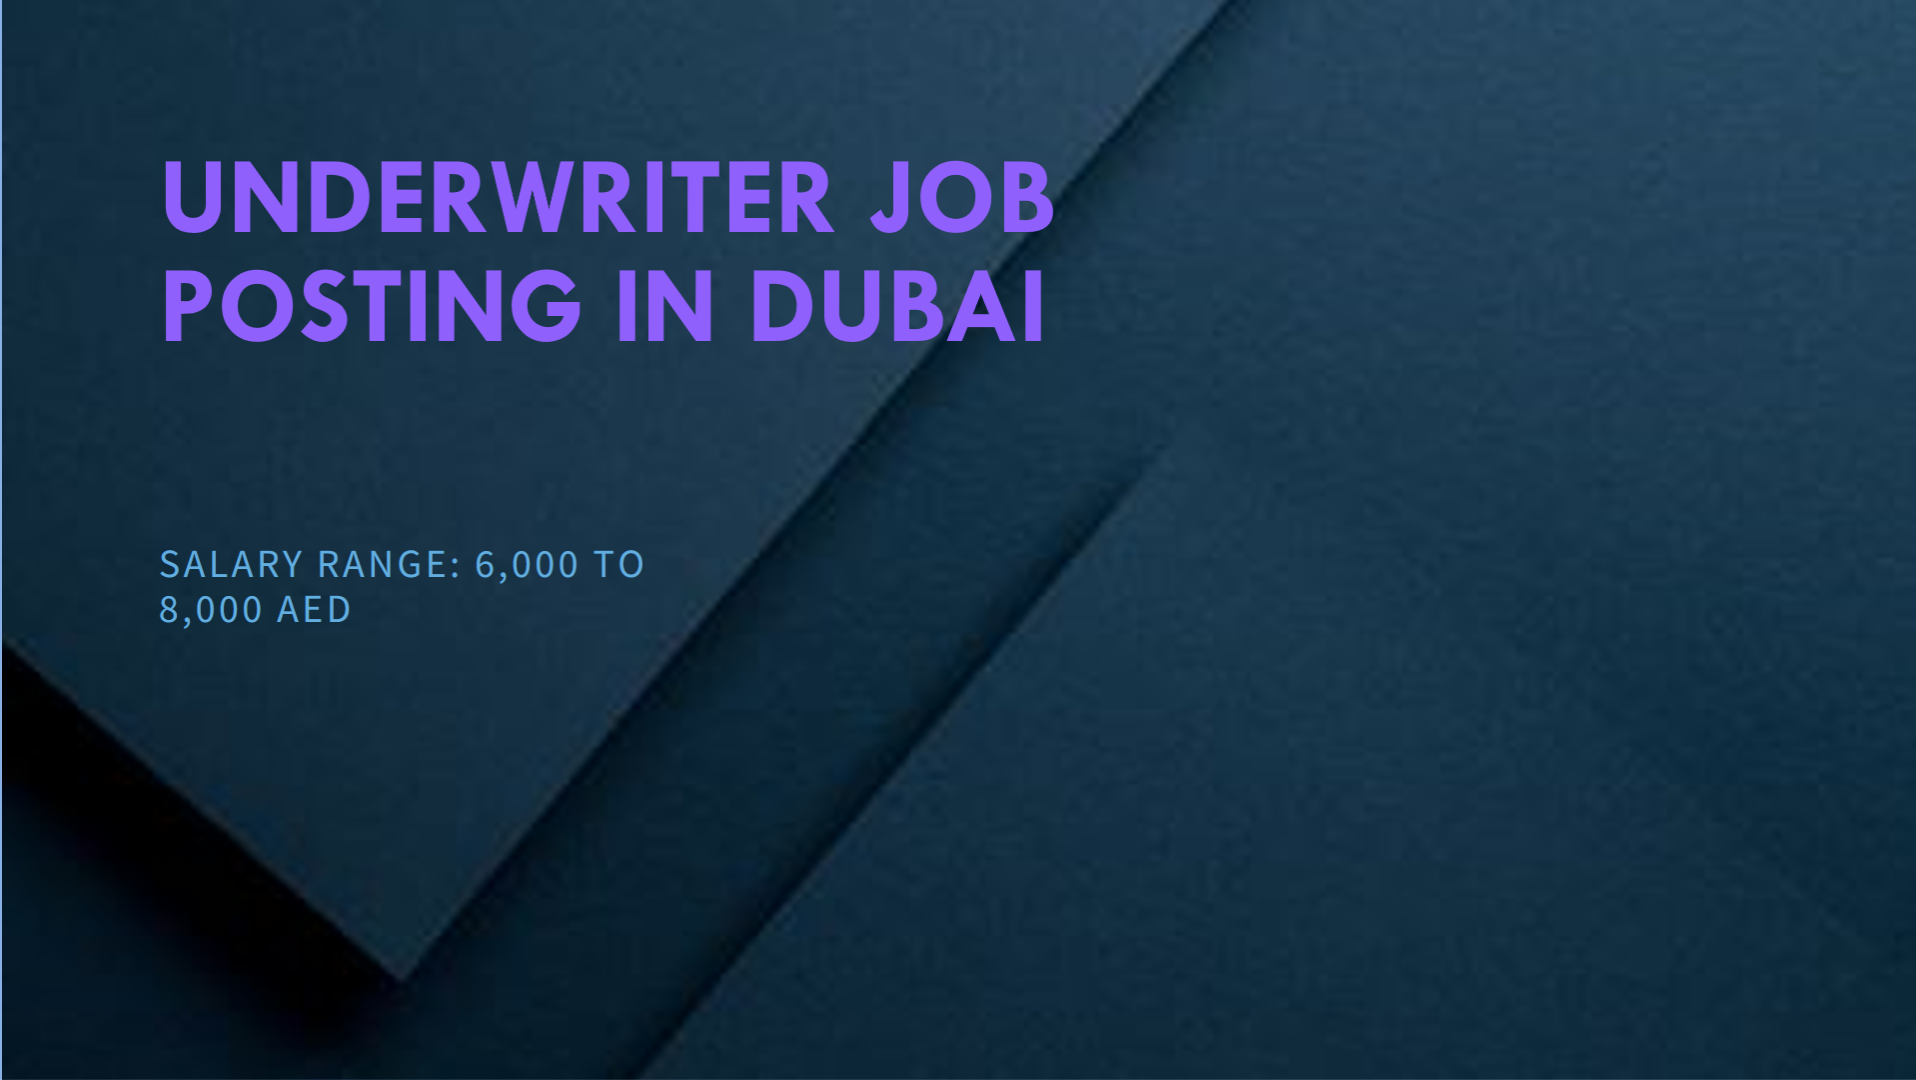 underwriter jobs in dubai with salary 6,000 to 8,000 AED